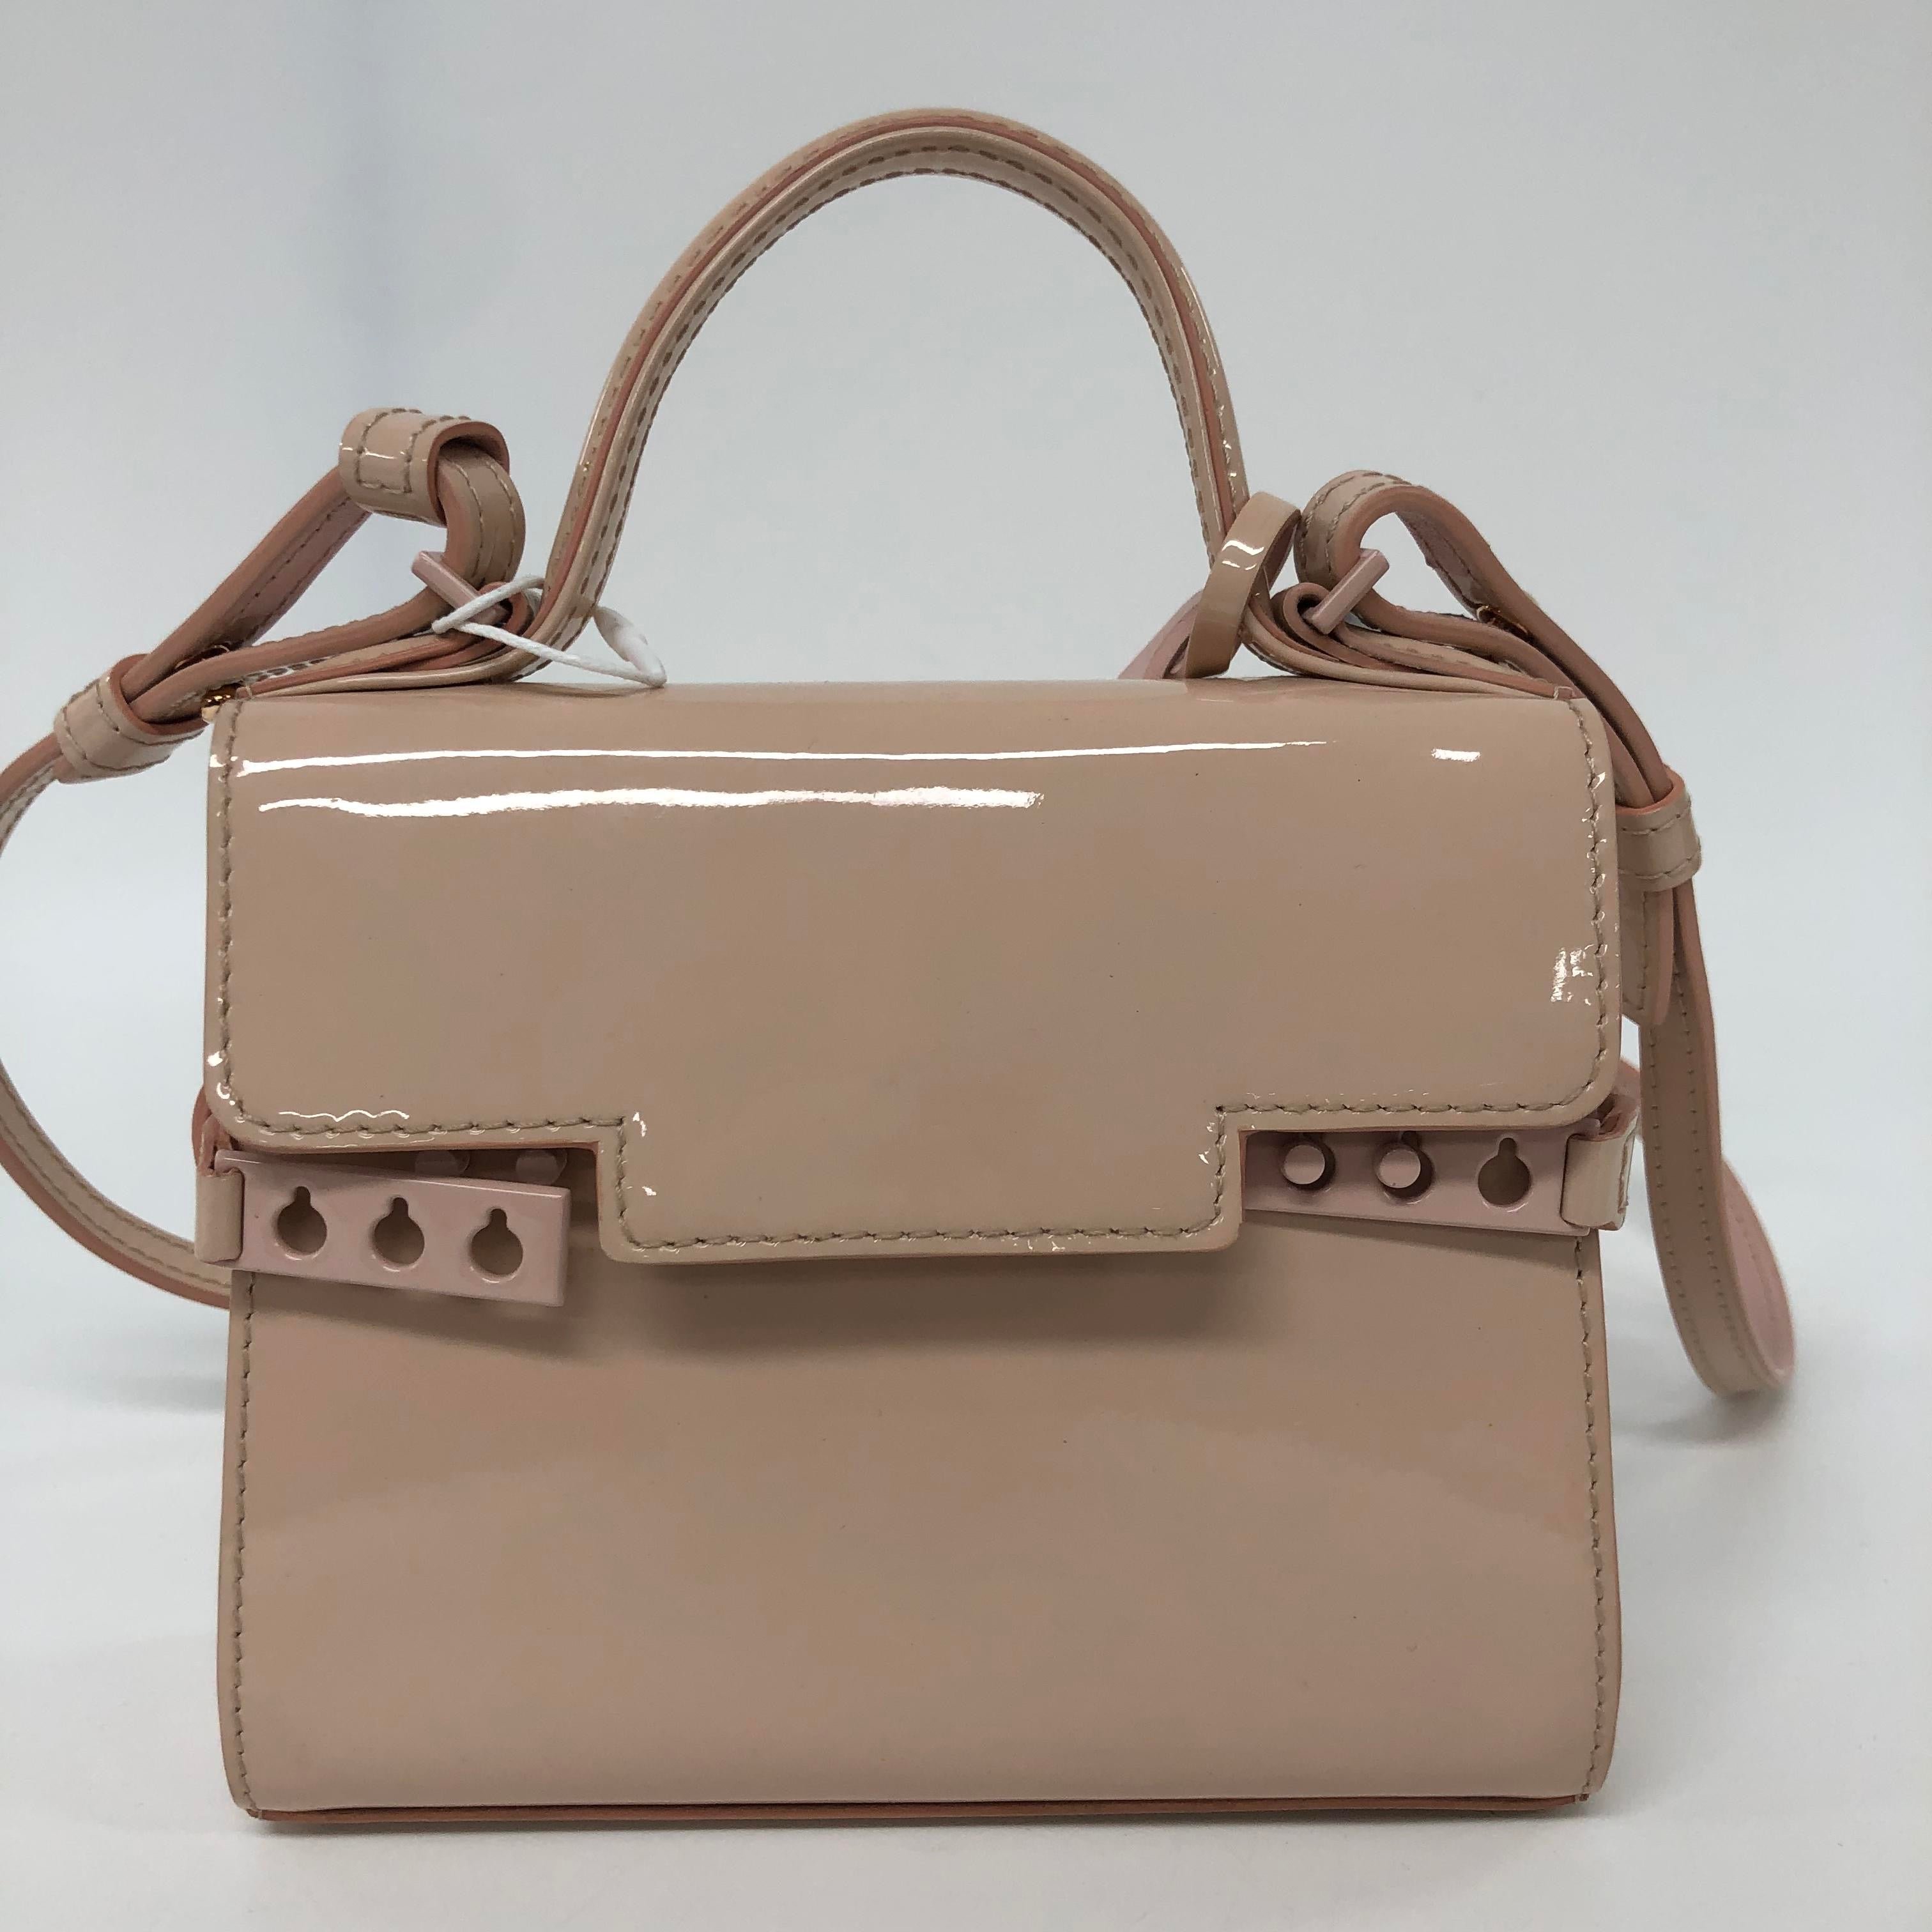 Tempete Patent Leather Crossbody Bag